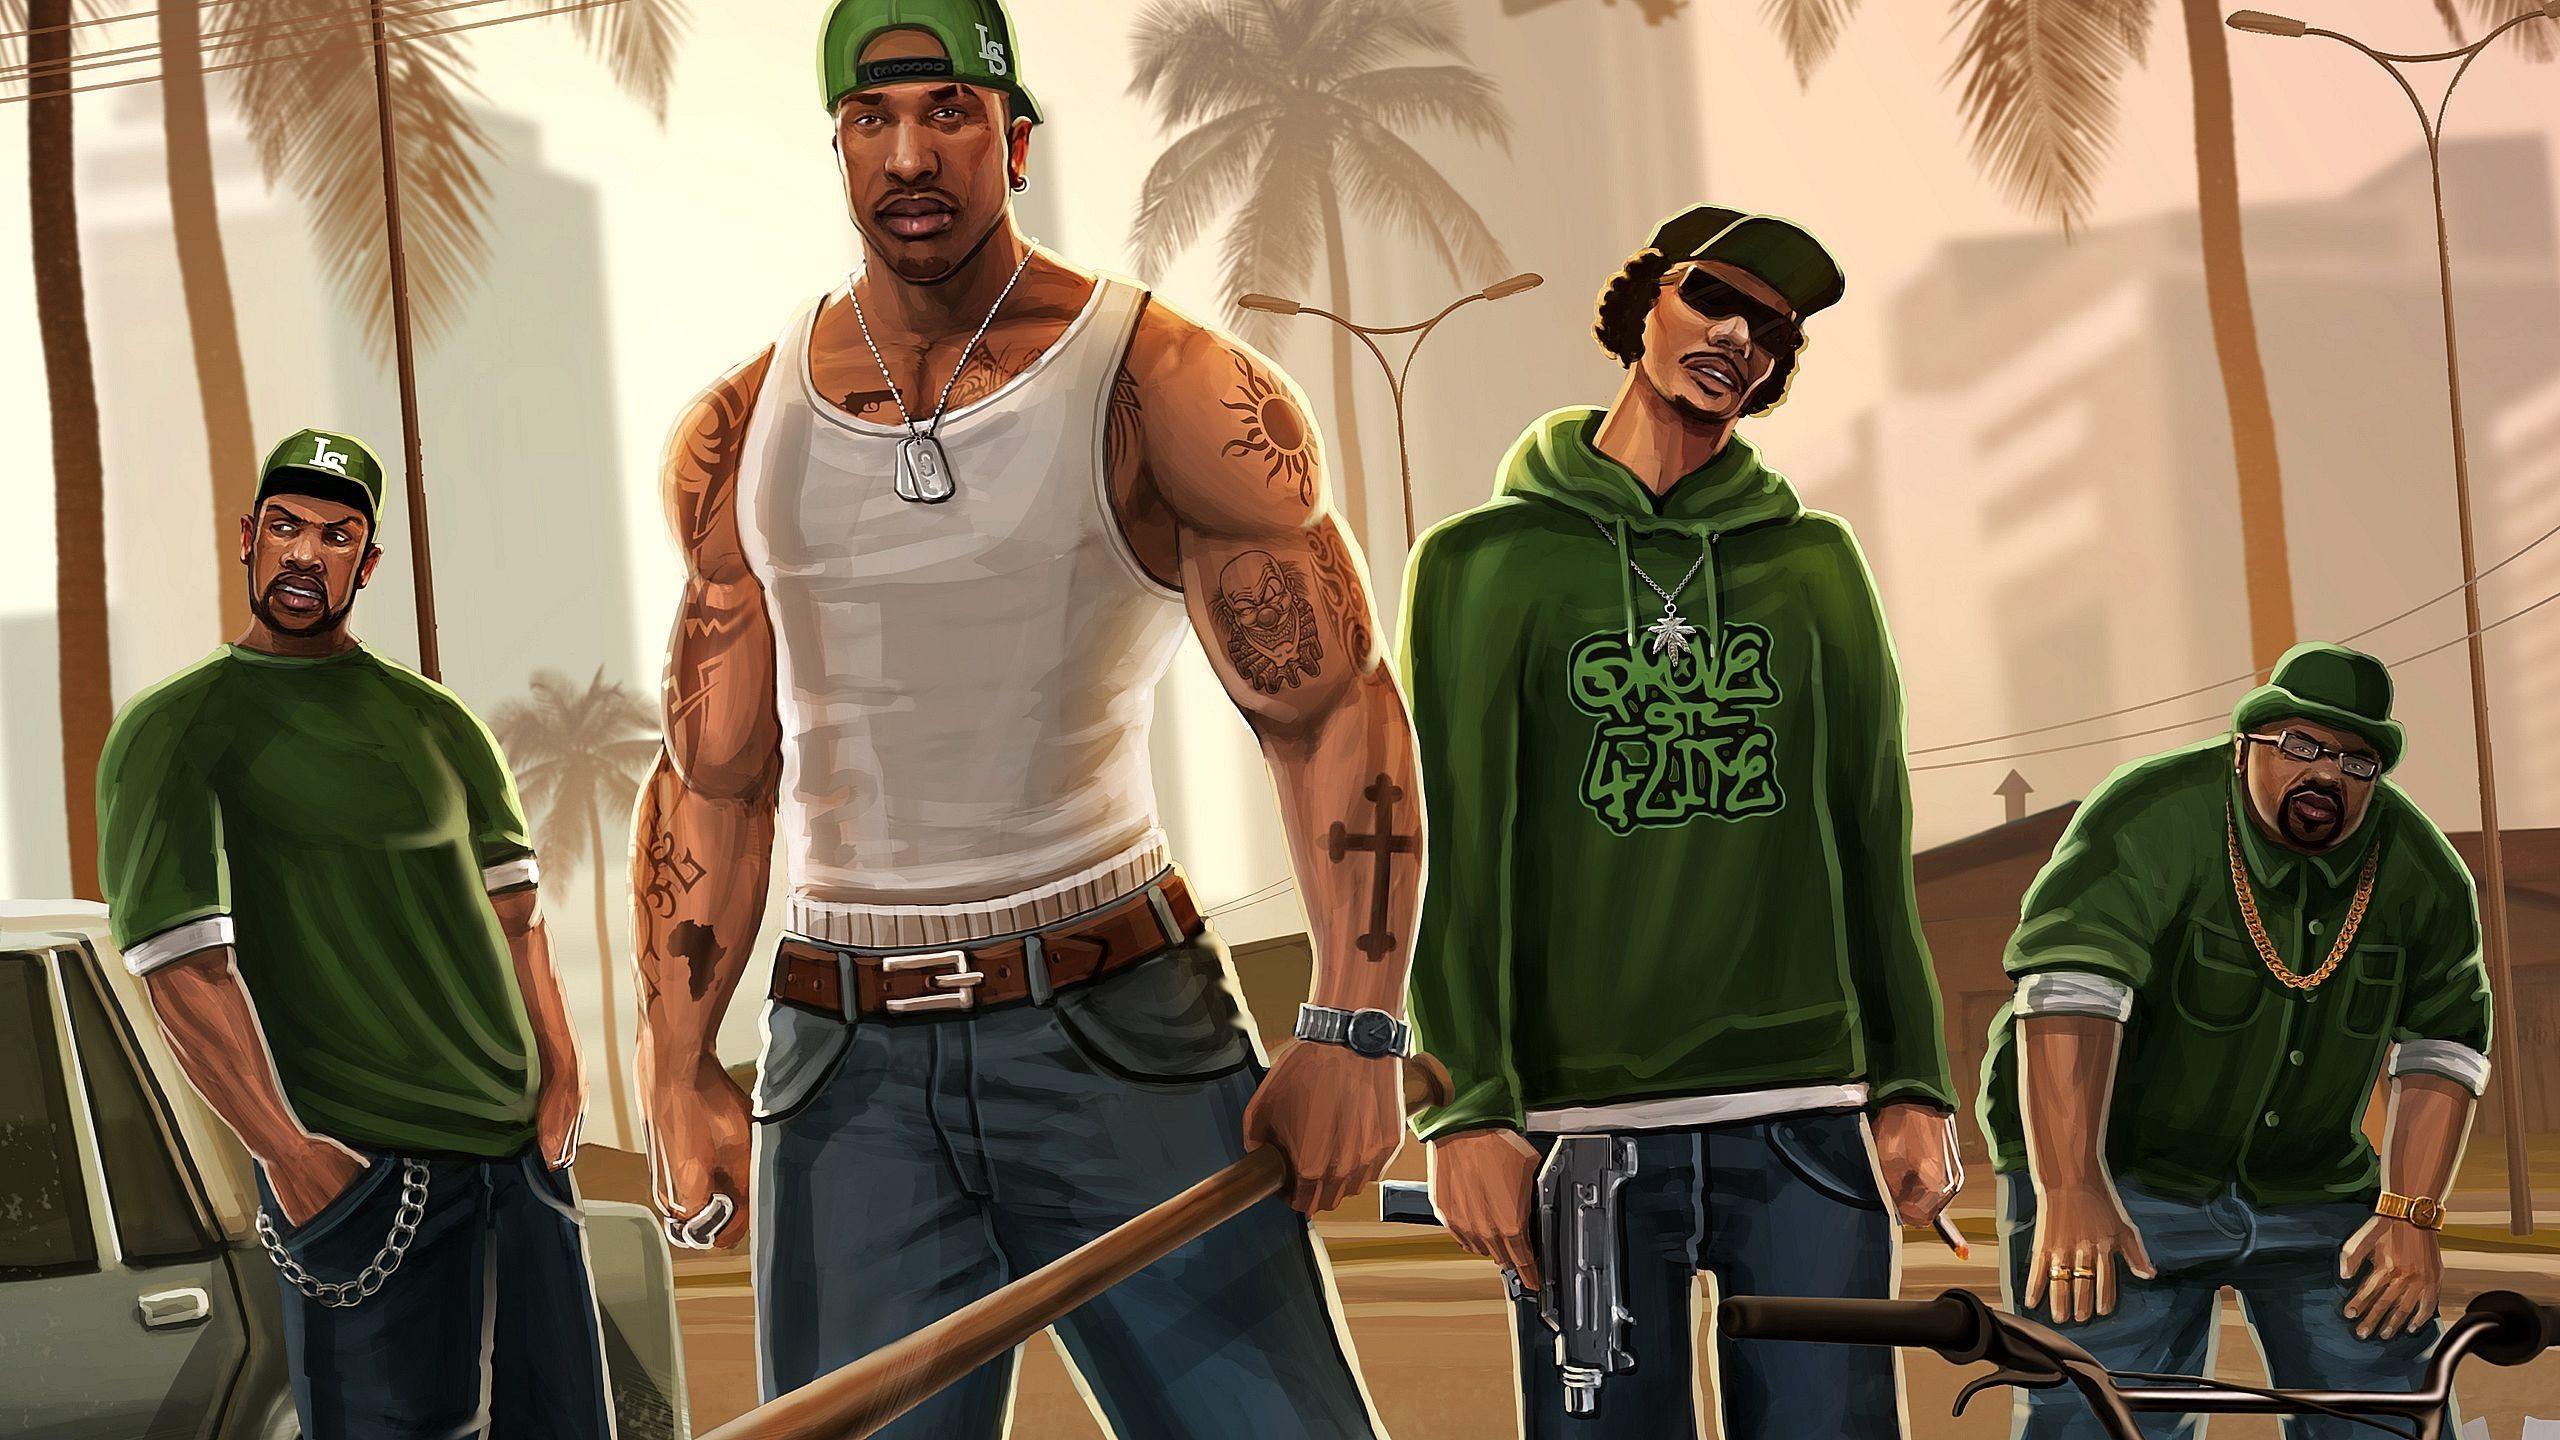 Hey guess what! New extension with CJ from GTA San Andreas